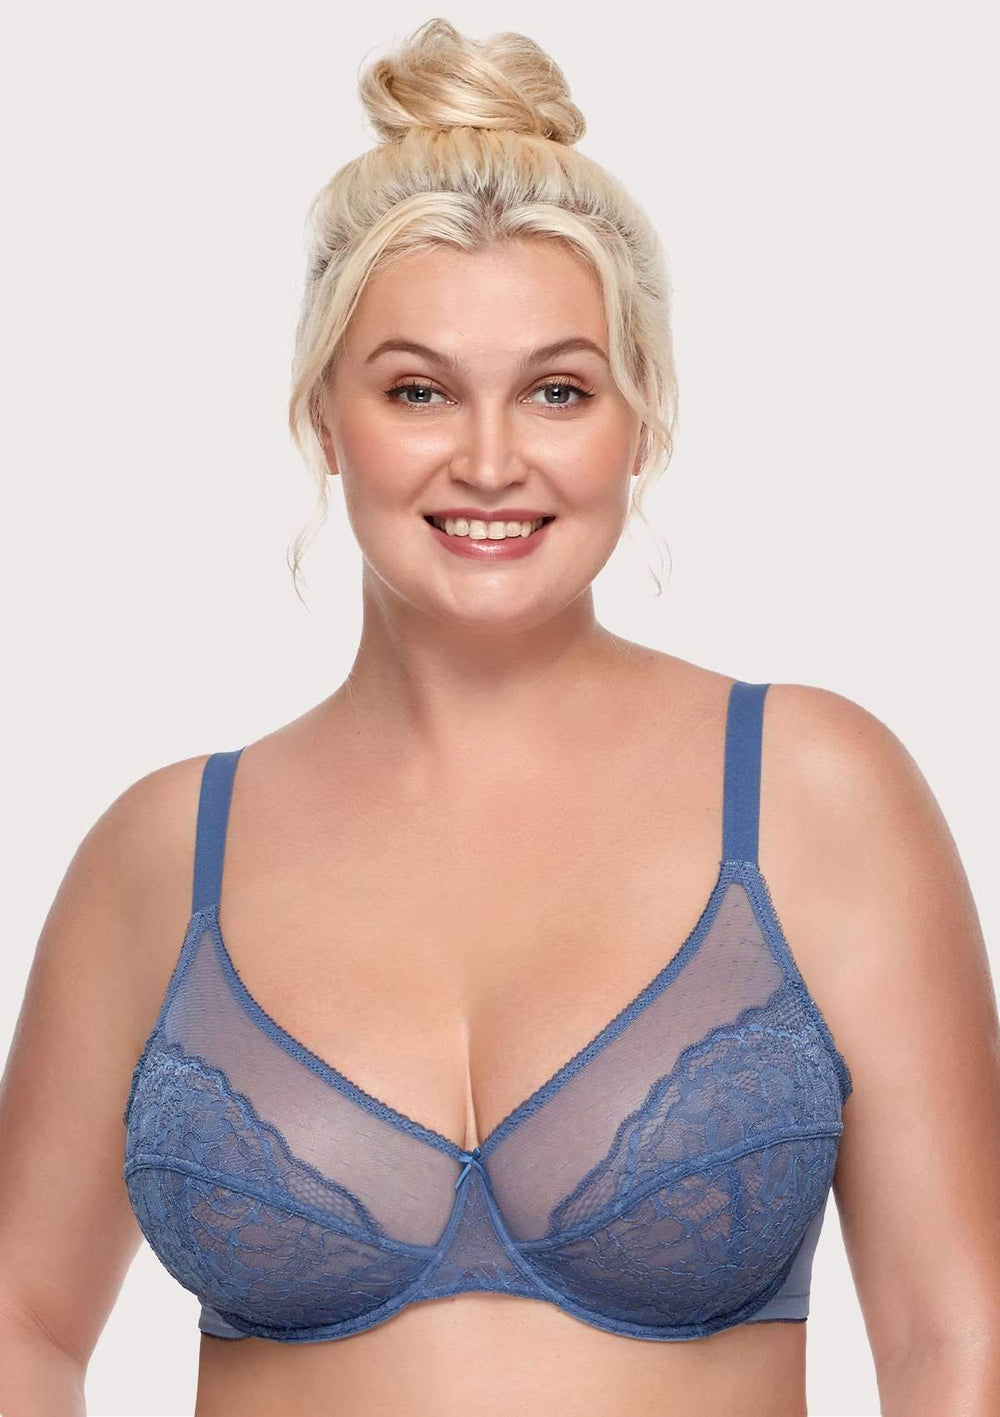 Bras For Women No Underwire Plus Size Adjustable Sports Extra-Elastic  Breathable Lace Trim Blue Push Up Bra 48B 